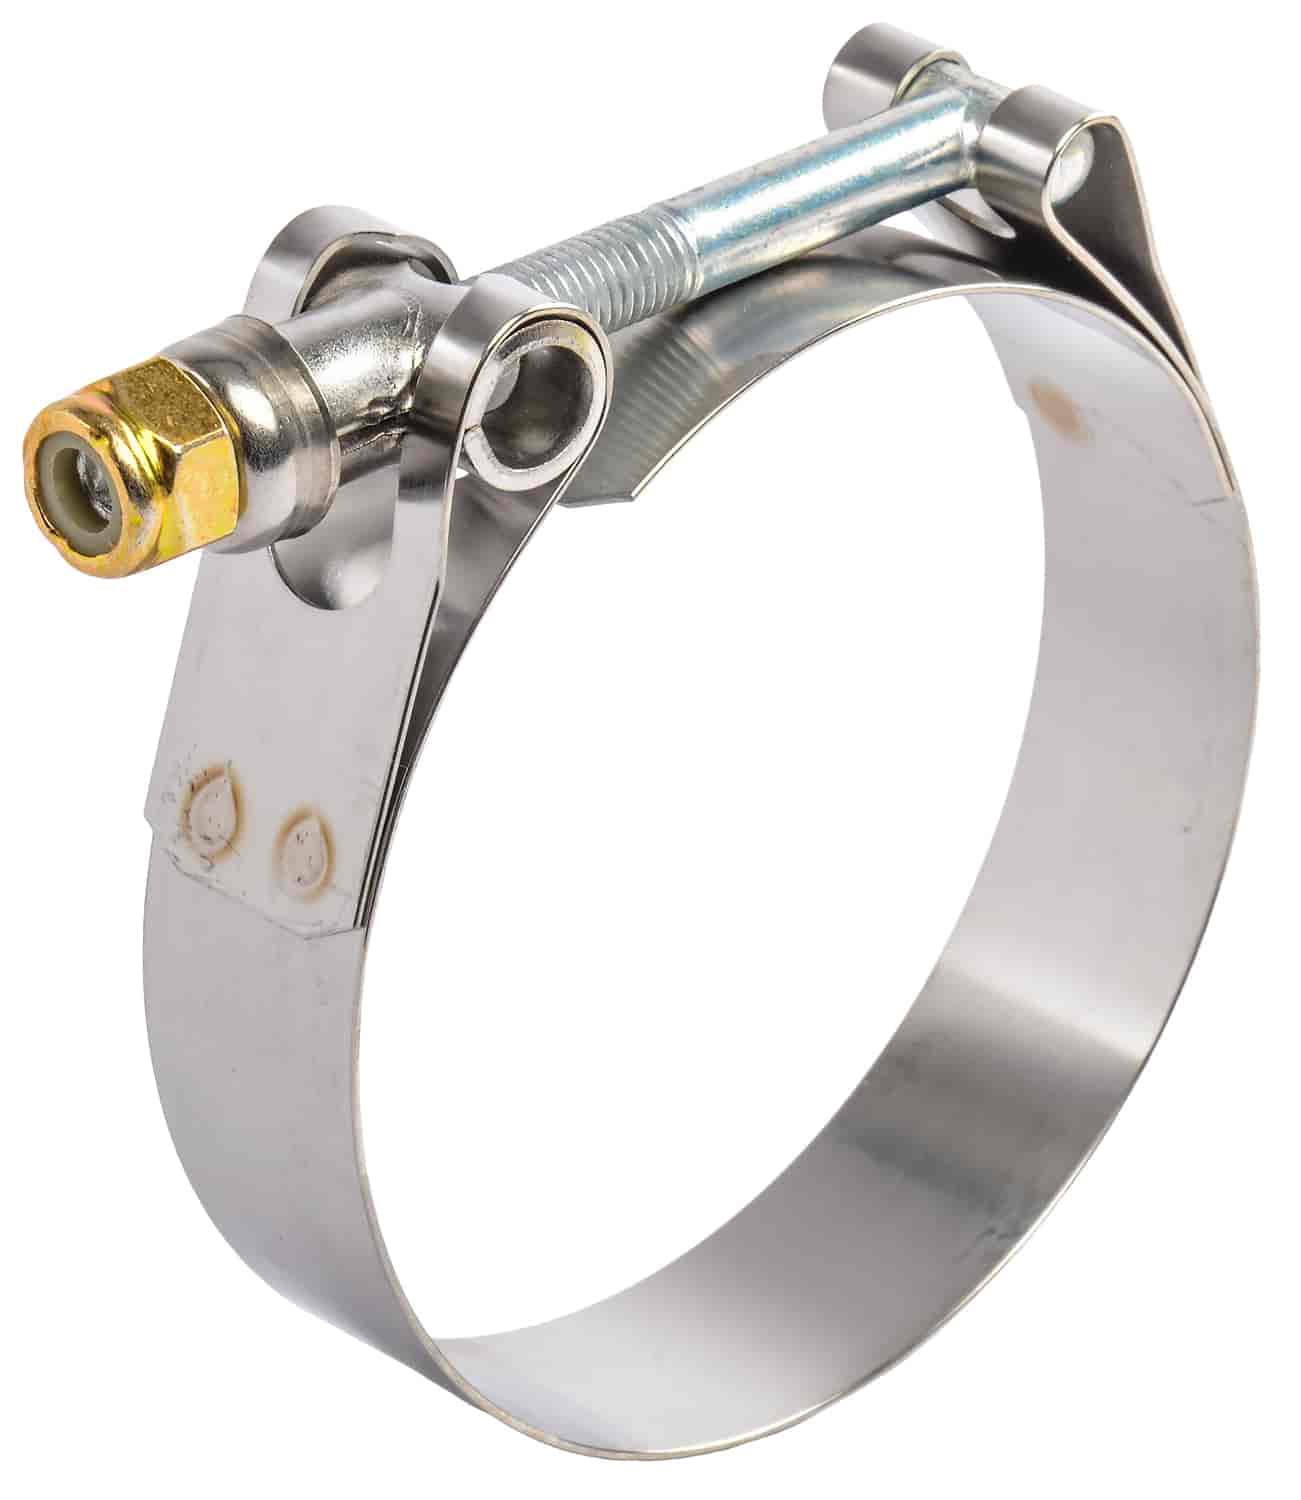 T-Bolt Hose Clamp 2.660" to 2.970" ID